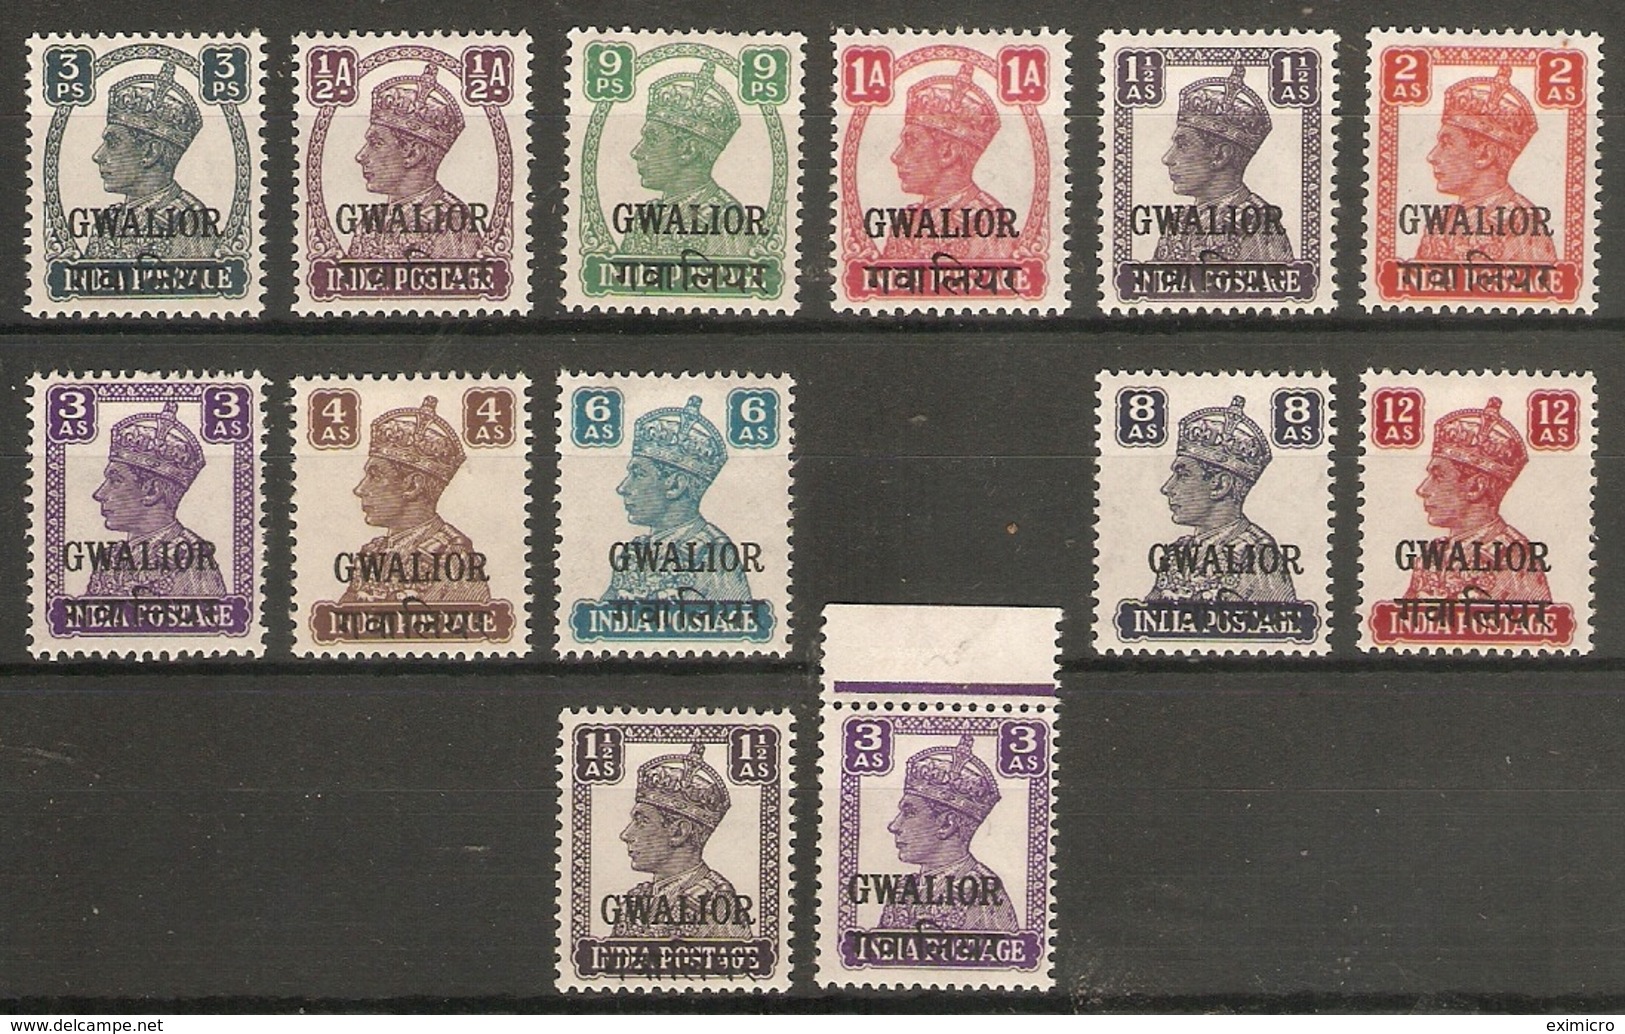 INDIA - GWALIOR 1942 - 1945 SET PLUS 1½a And 3a TYPOGRAPHICAL PRINTINGS SG 118/128 LMM/UM Cat £55 - Gwalior